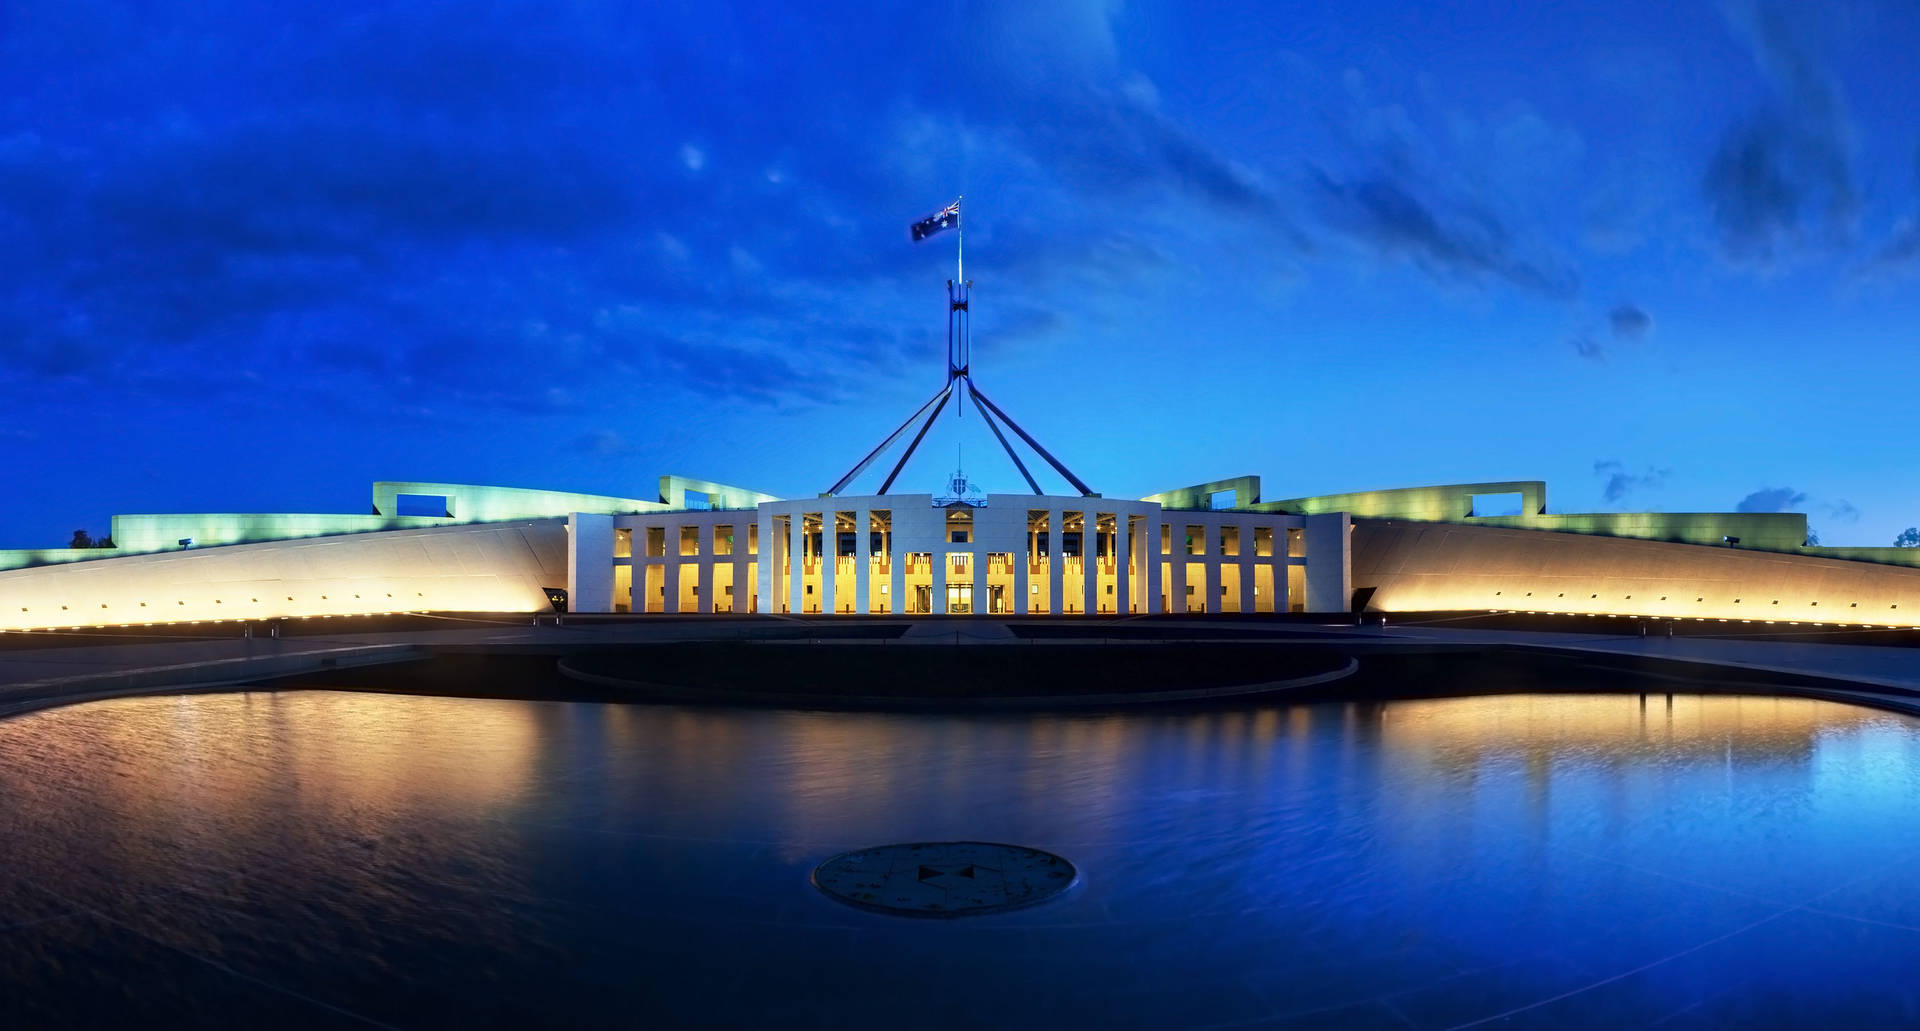 Canberra Wallpapers